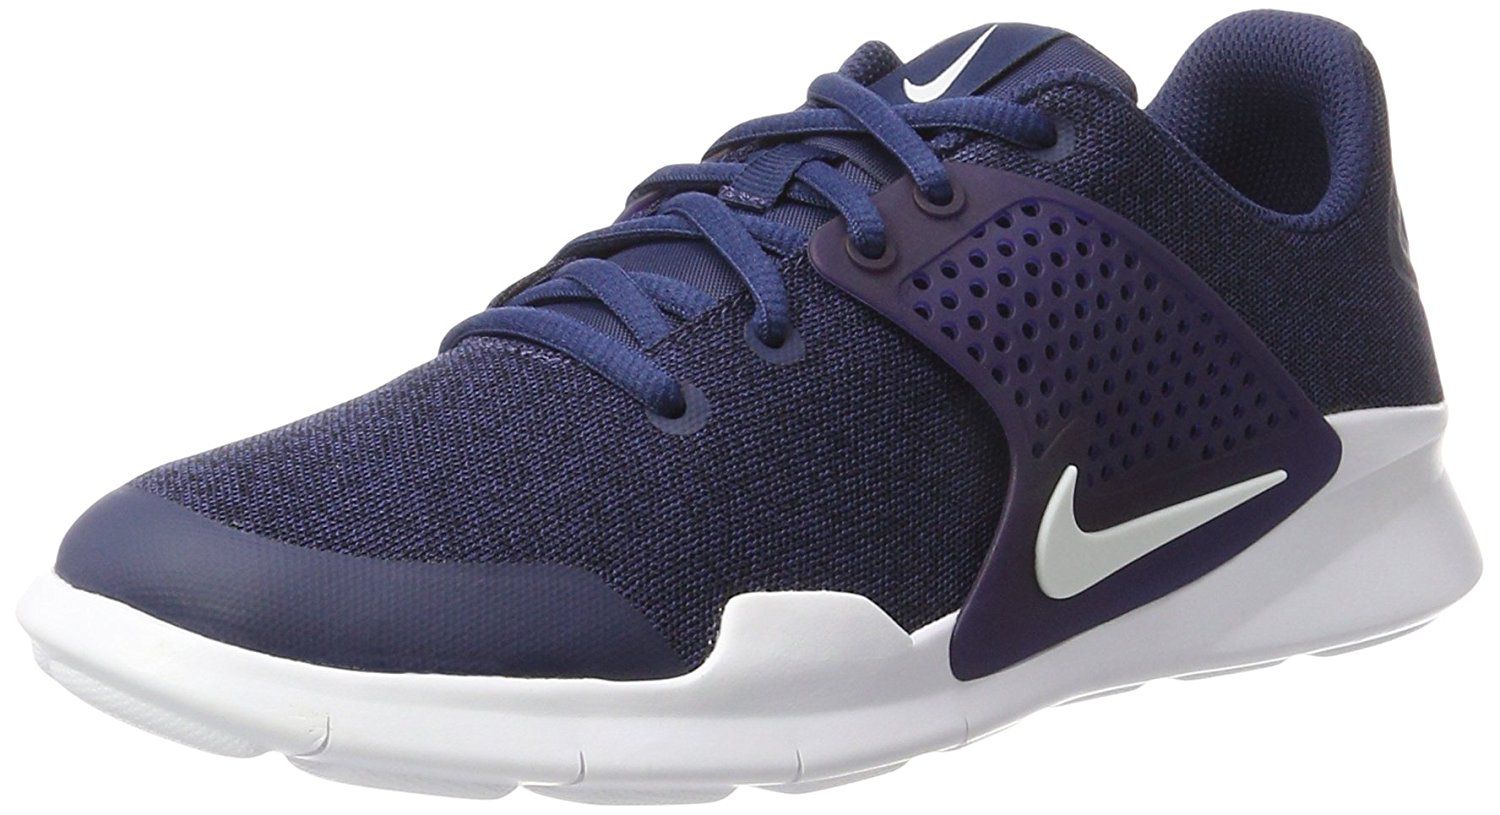 Nike 902813--003 Blue Running Shoes - Buy Nike 902813--003 Blue Running  Shoes Online at Best Prices in India on Snapdeal